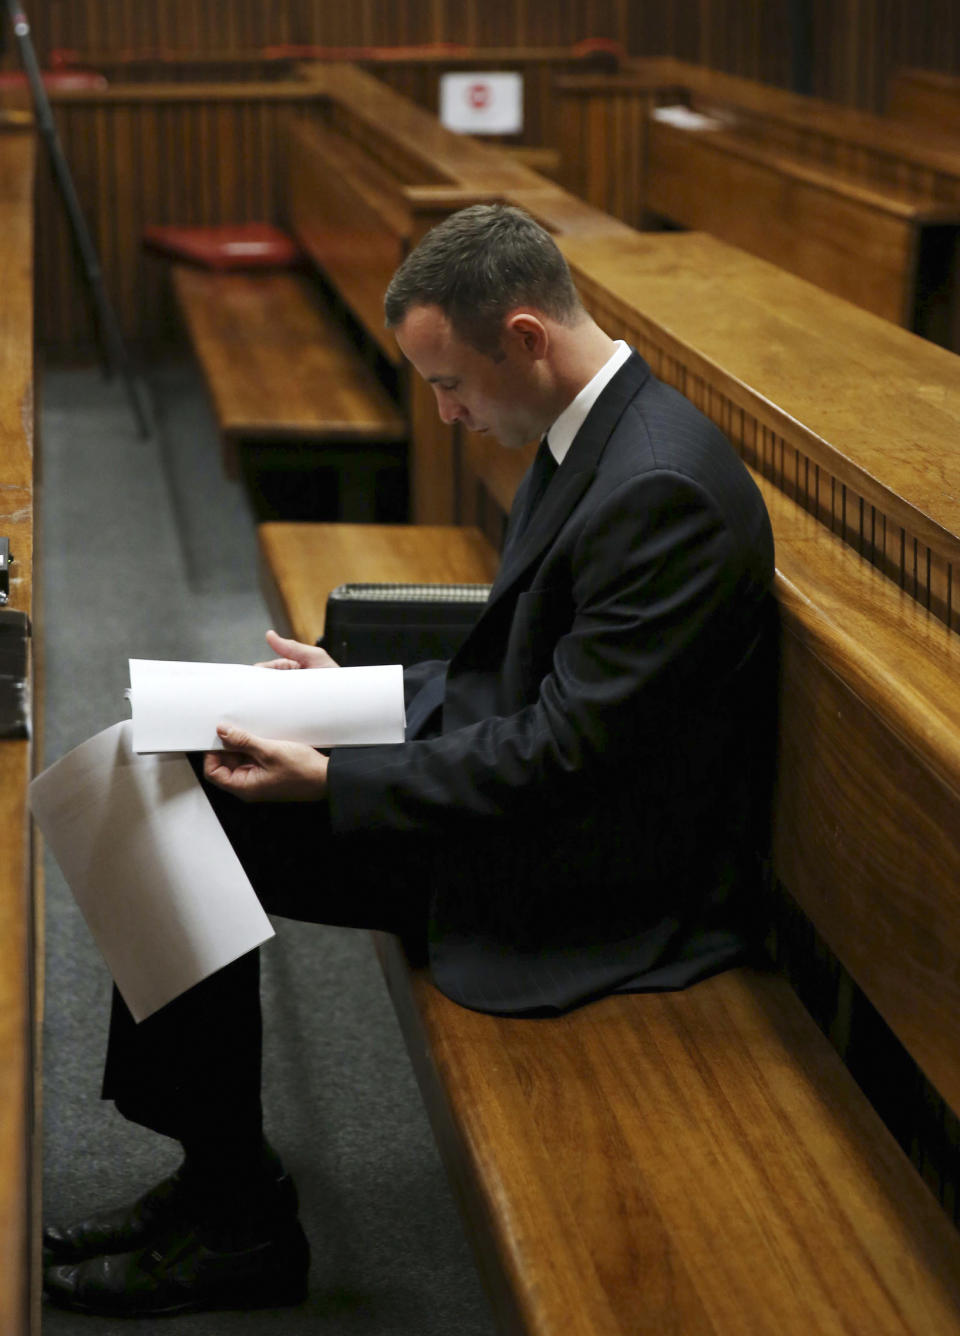 Oscar Pistorius sits in the dock at a court in Pretoria, South Africa, Tuesday, March 25, 2014. Pistorius is charged with the Valentines Day 2013 shooting death of his girlfriend Reeva Steenkamp. (AP Photo/Esa Alexander, Pool)